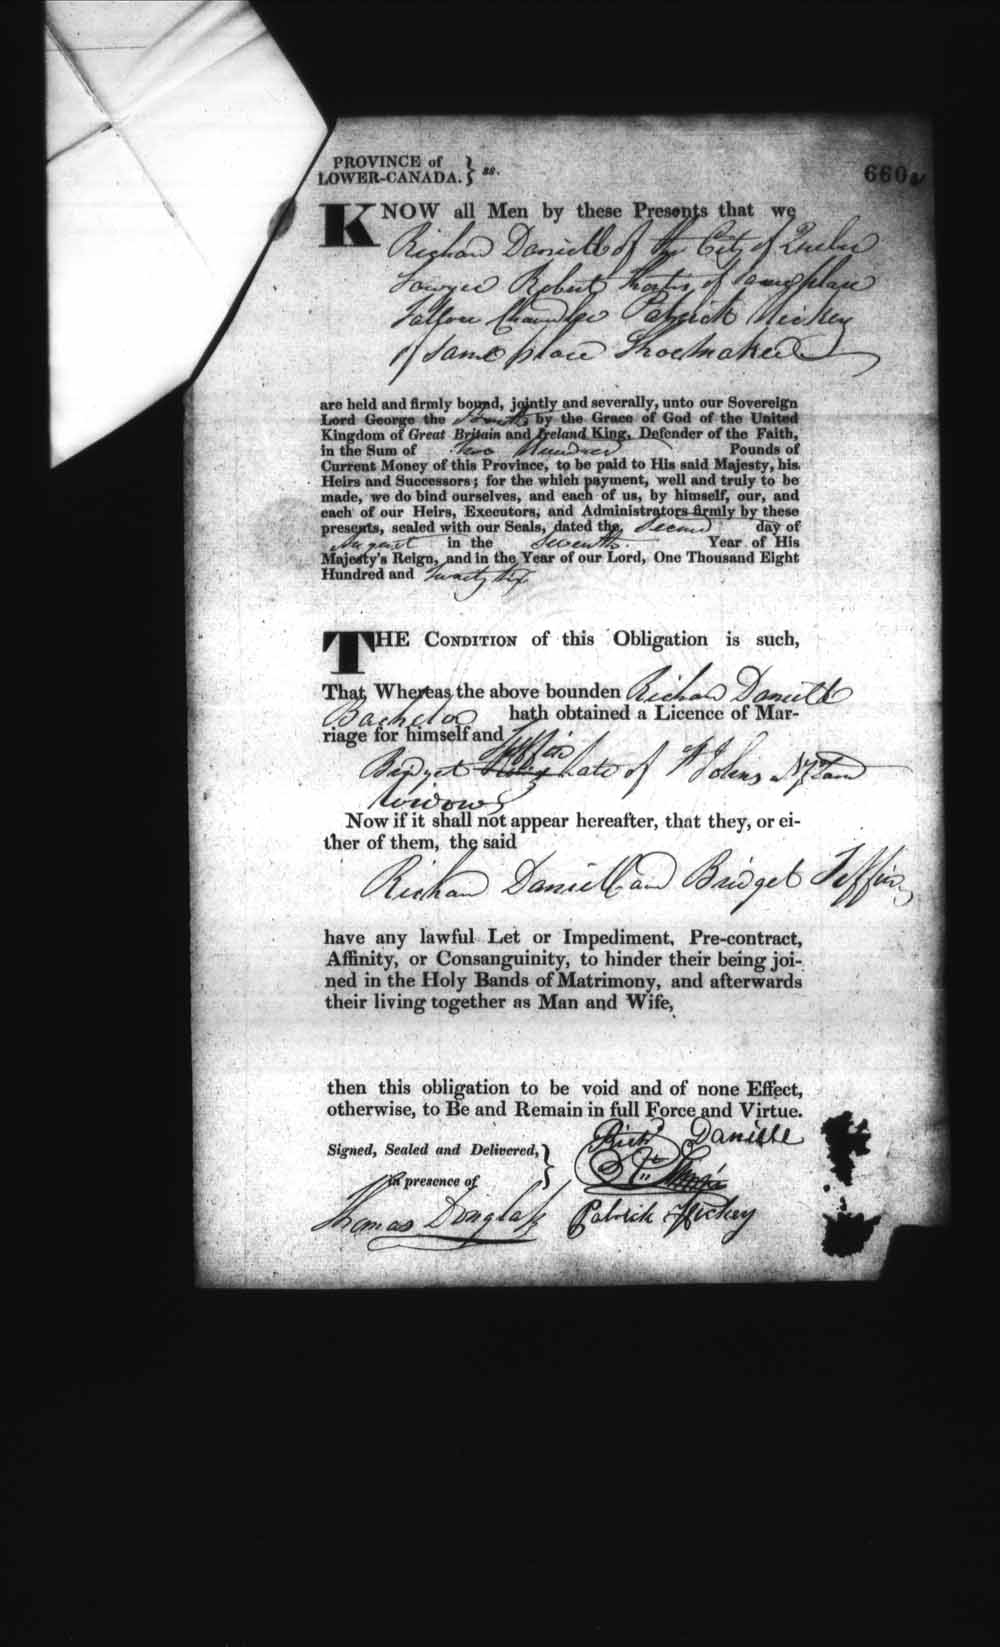 Digitized page of Upper and Lower Canada Marriage Bonds (1779-1865) for Image No.: e008236696